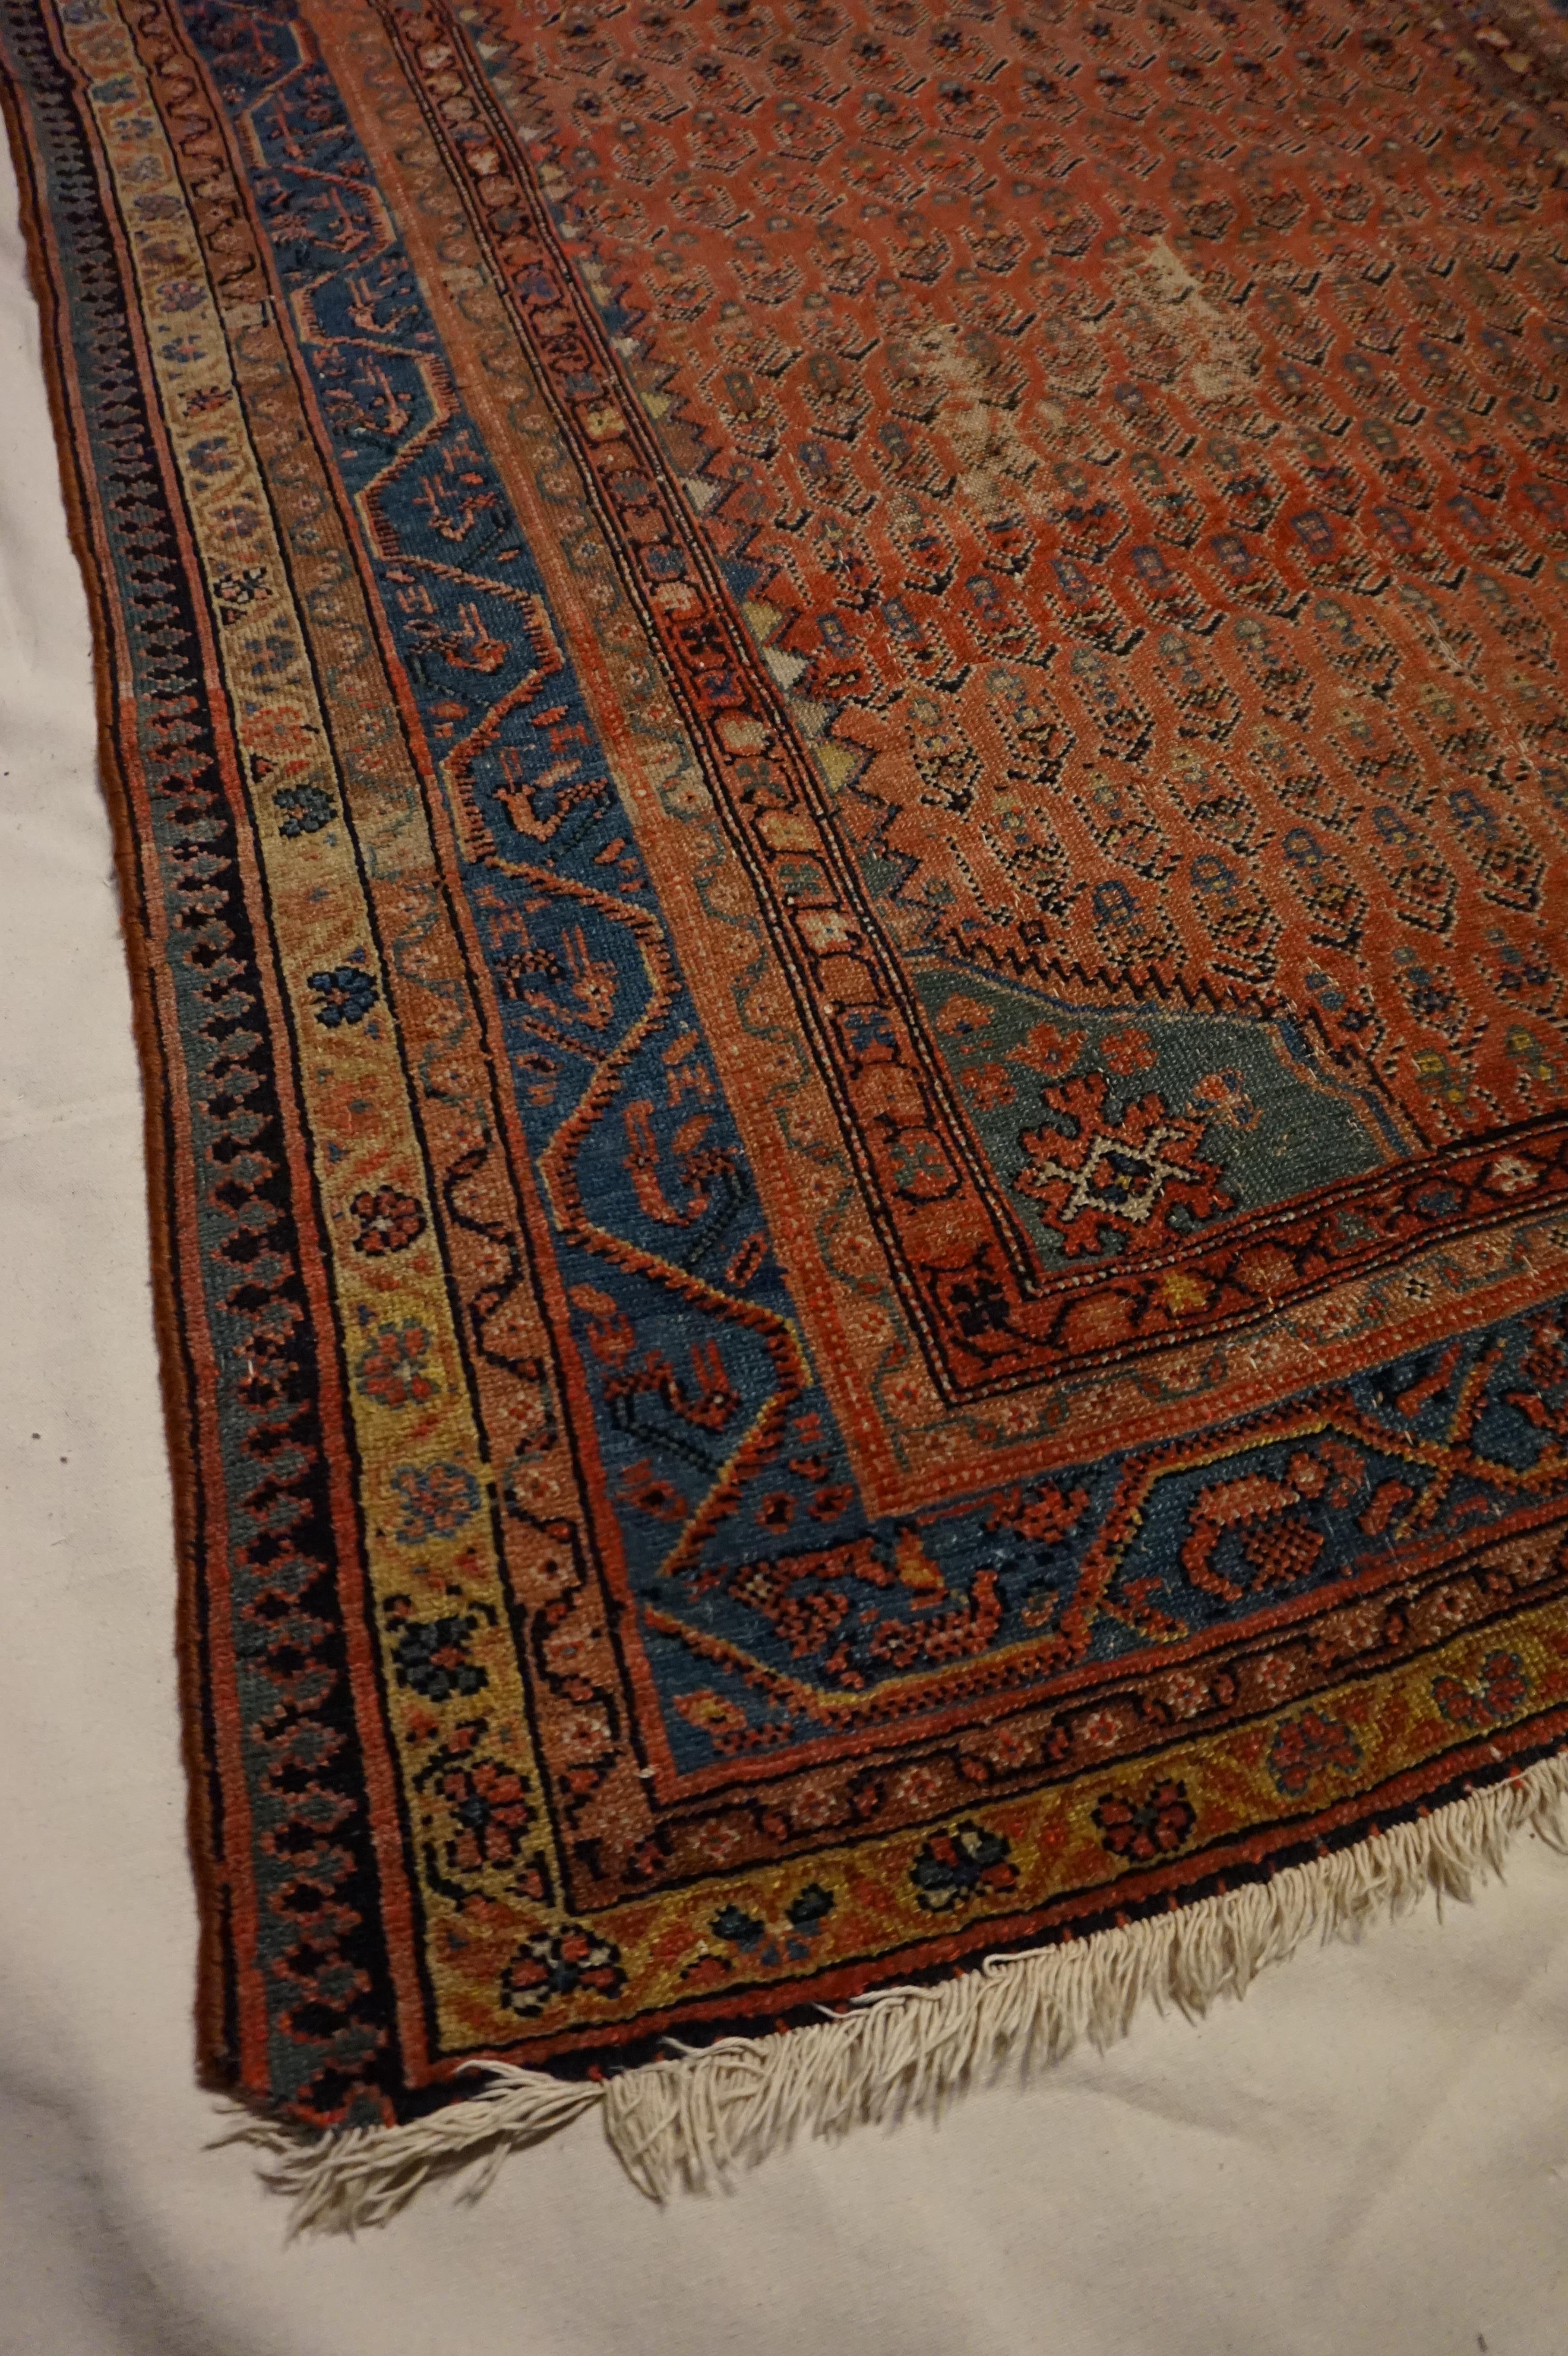 19th Century Tribal Boteh Paisley Hand-knotted Rug In Rust Hues For Sale 4